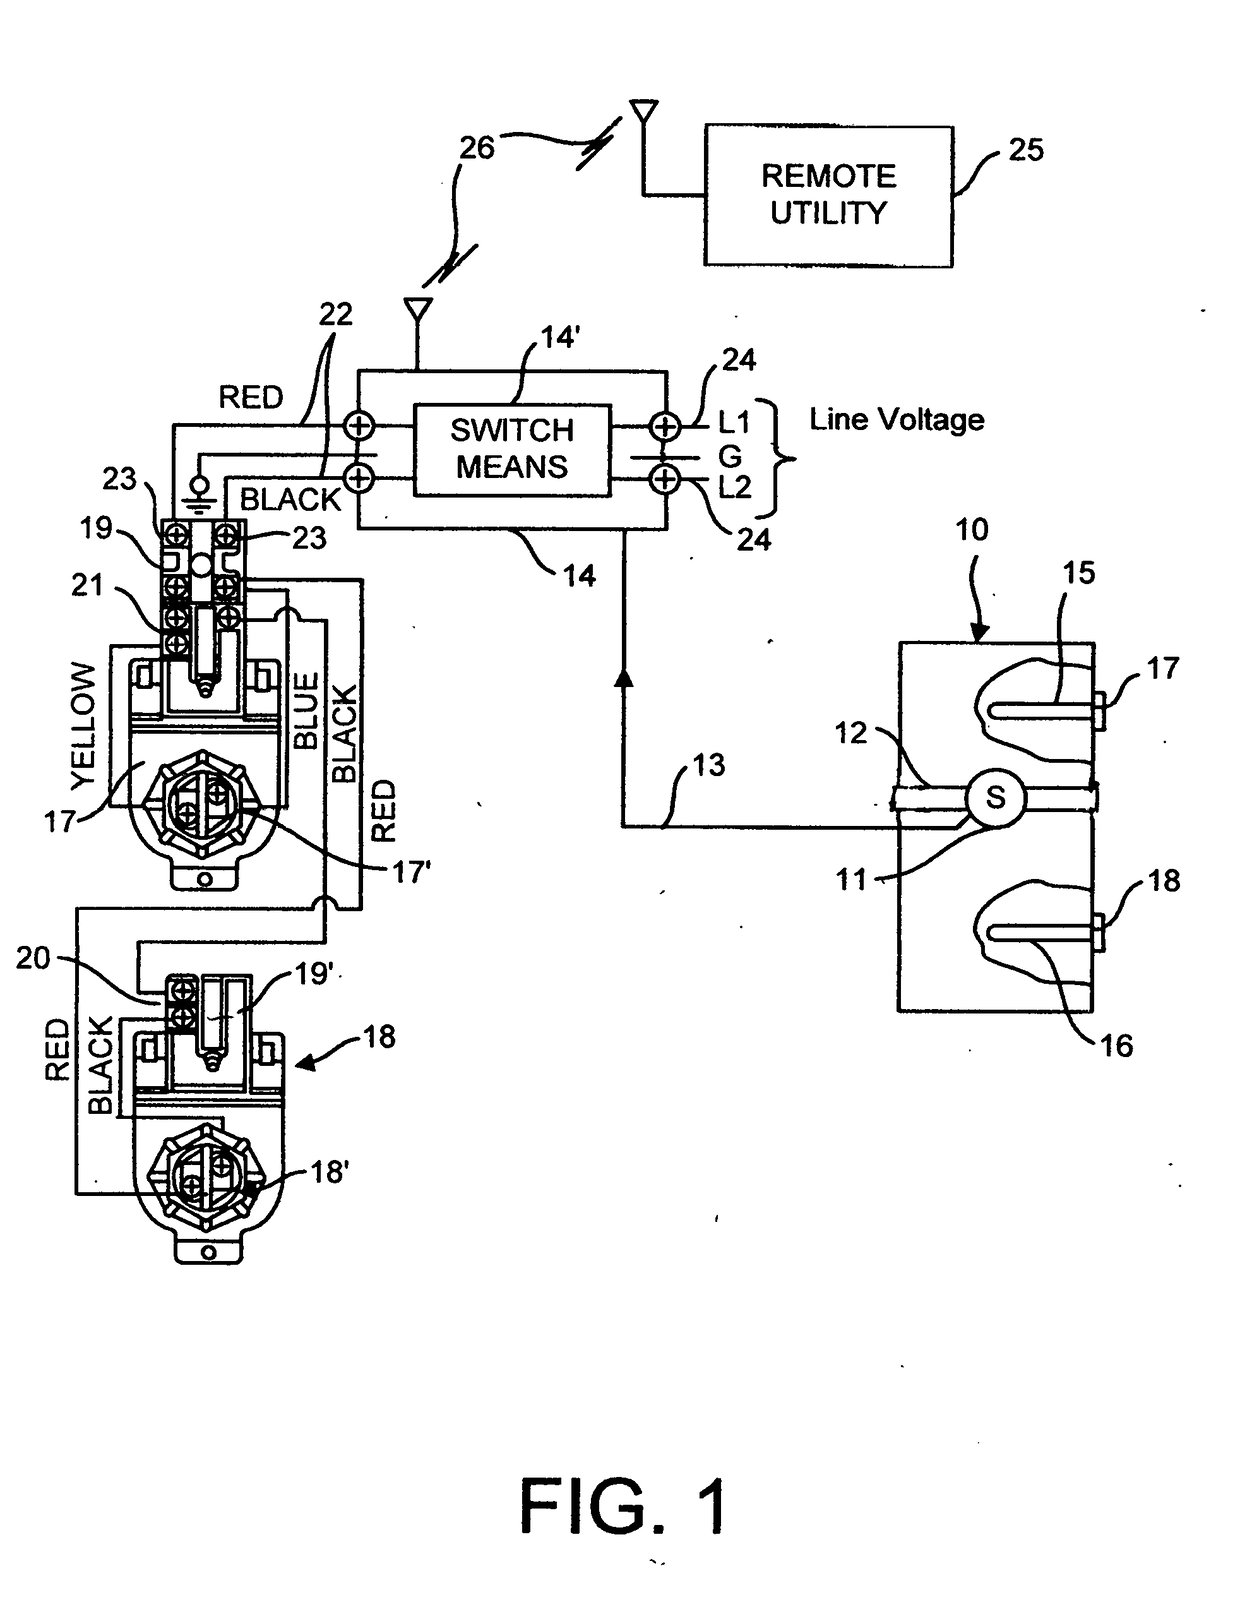 Safety power connecting system and method for electric water heaters